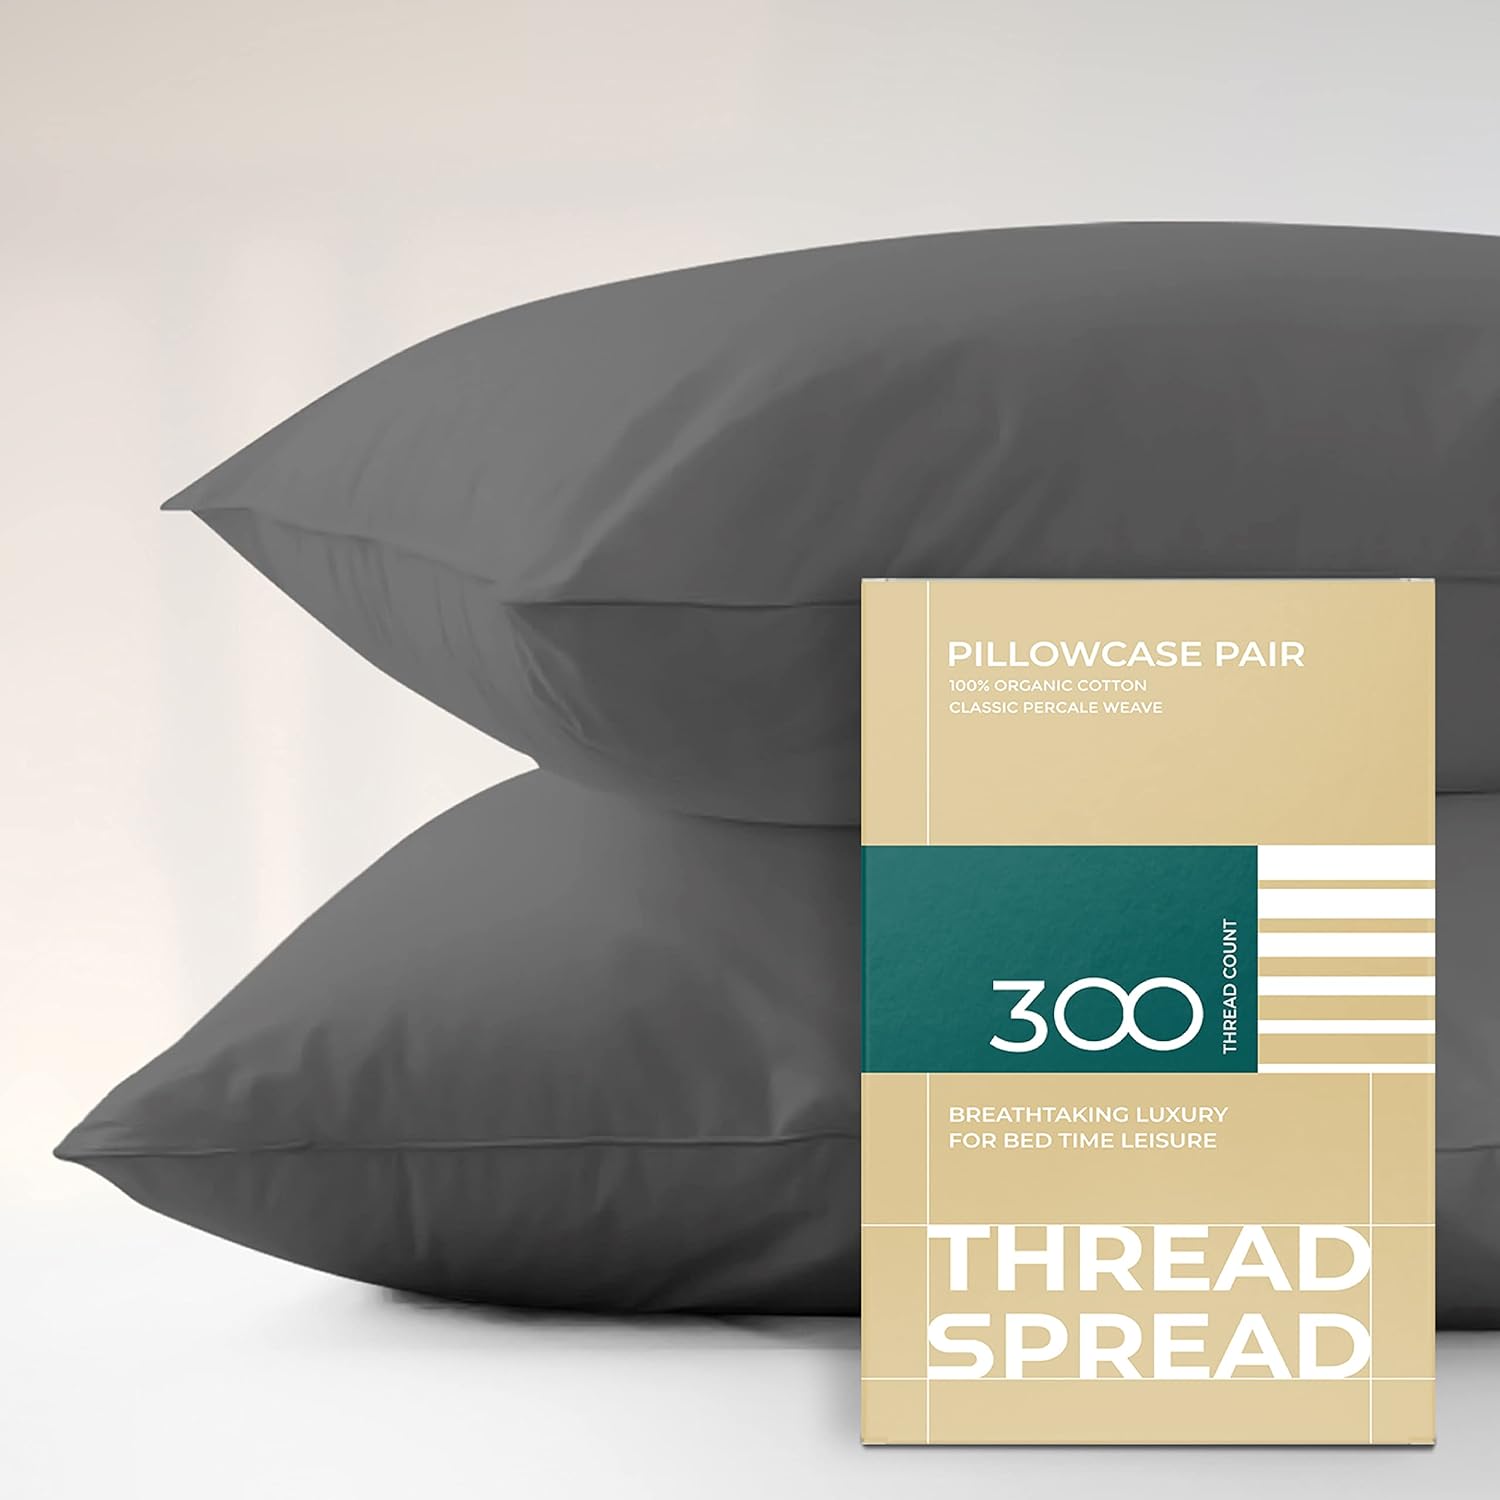 THREAD SPREAD 100% Organic Cotton Pillowcases - Soft and Crisp, Cooling Percale Weave, Breathable Pillow Covers, Set of 2 (Queen Size, Dark Gray)